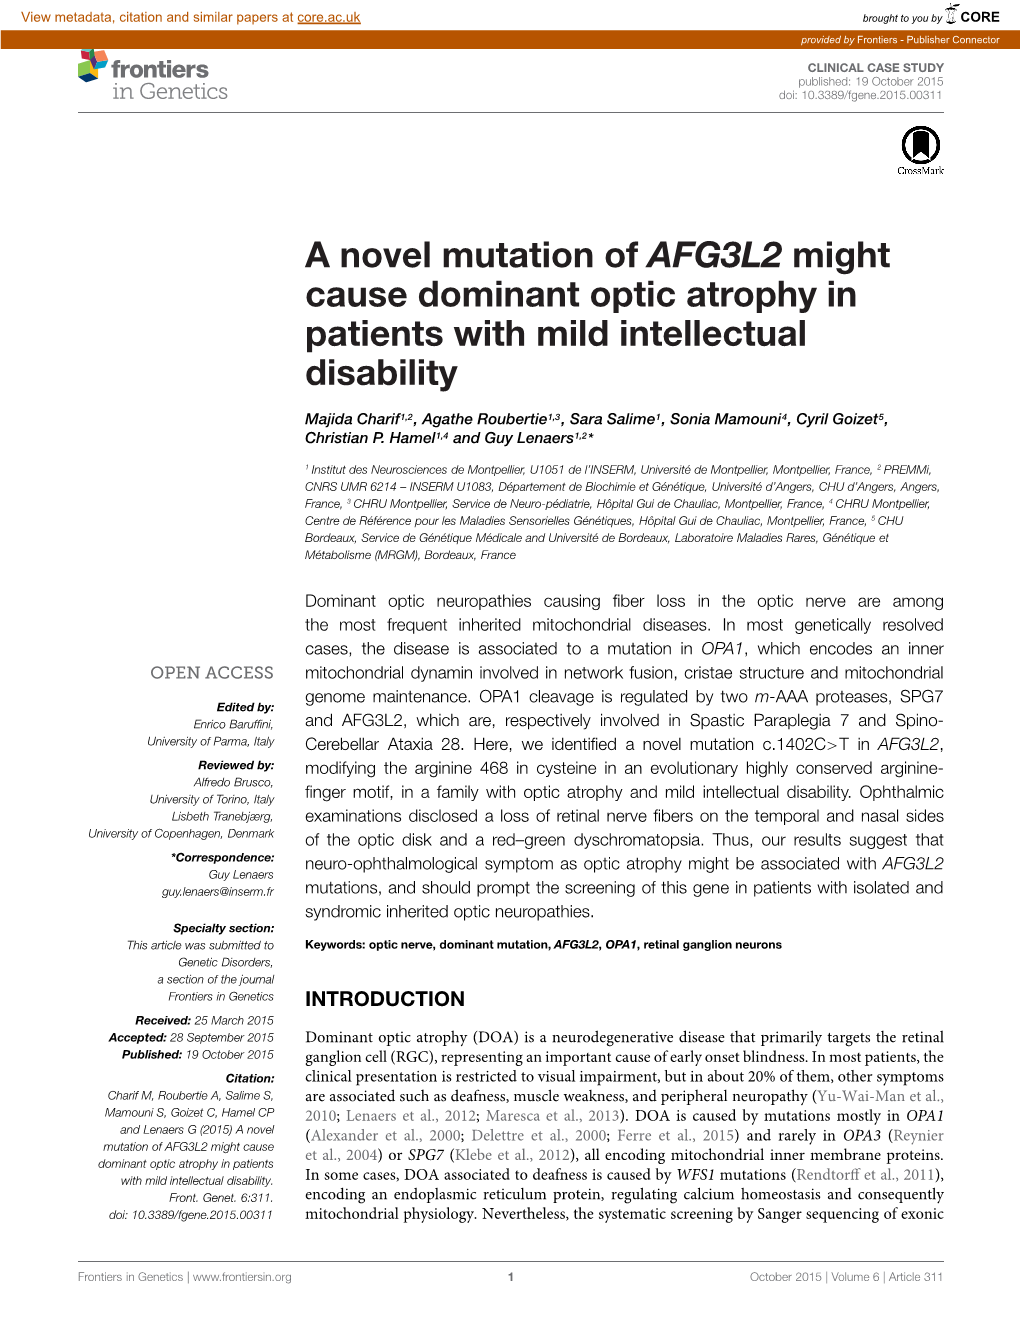 A Novel Mutation of AFG3L2 Might Cause Dominant Optic Atrophy in Patients with Mild Intellectual Disability